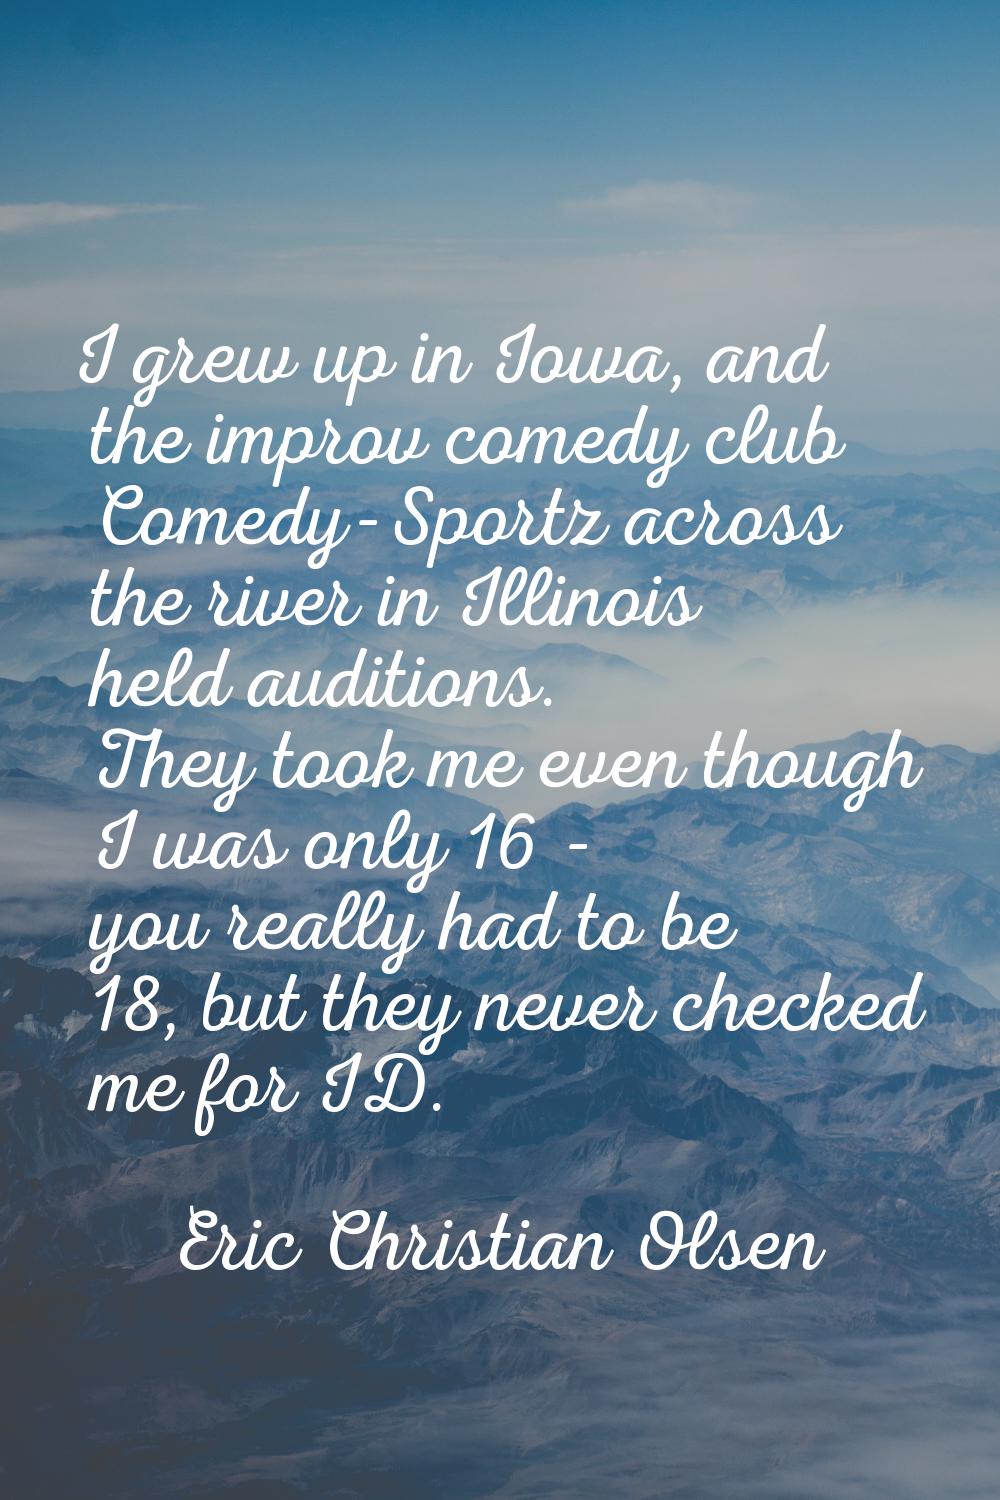 I grew up in Iowa, and the improv comedy club Comedy-Sportz across the river in Illinois held audit